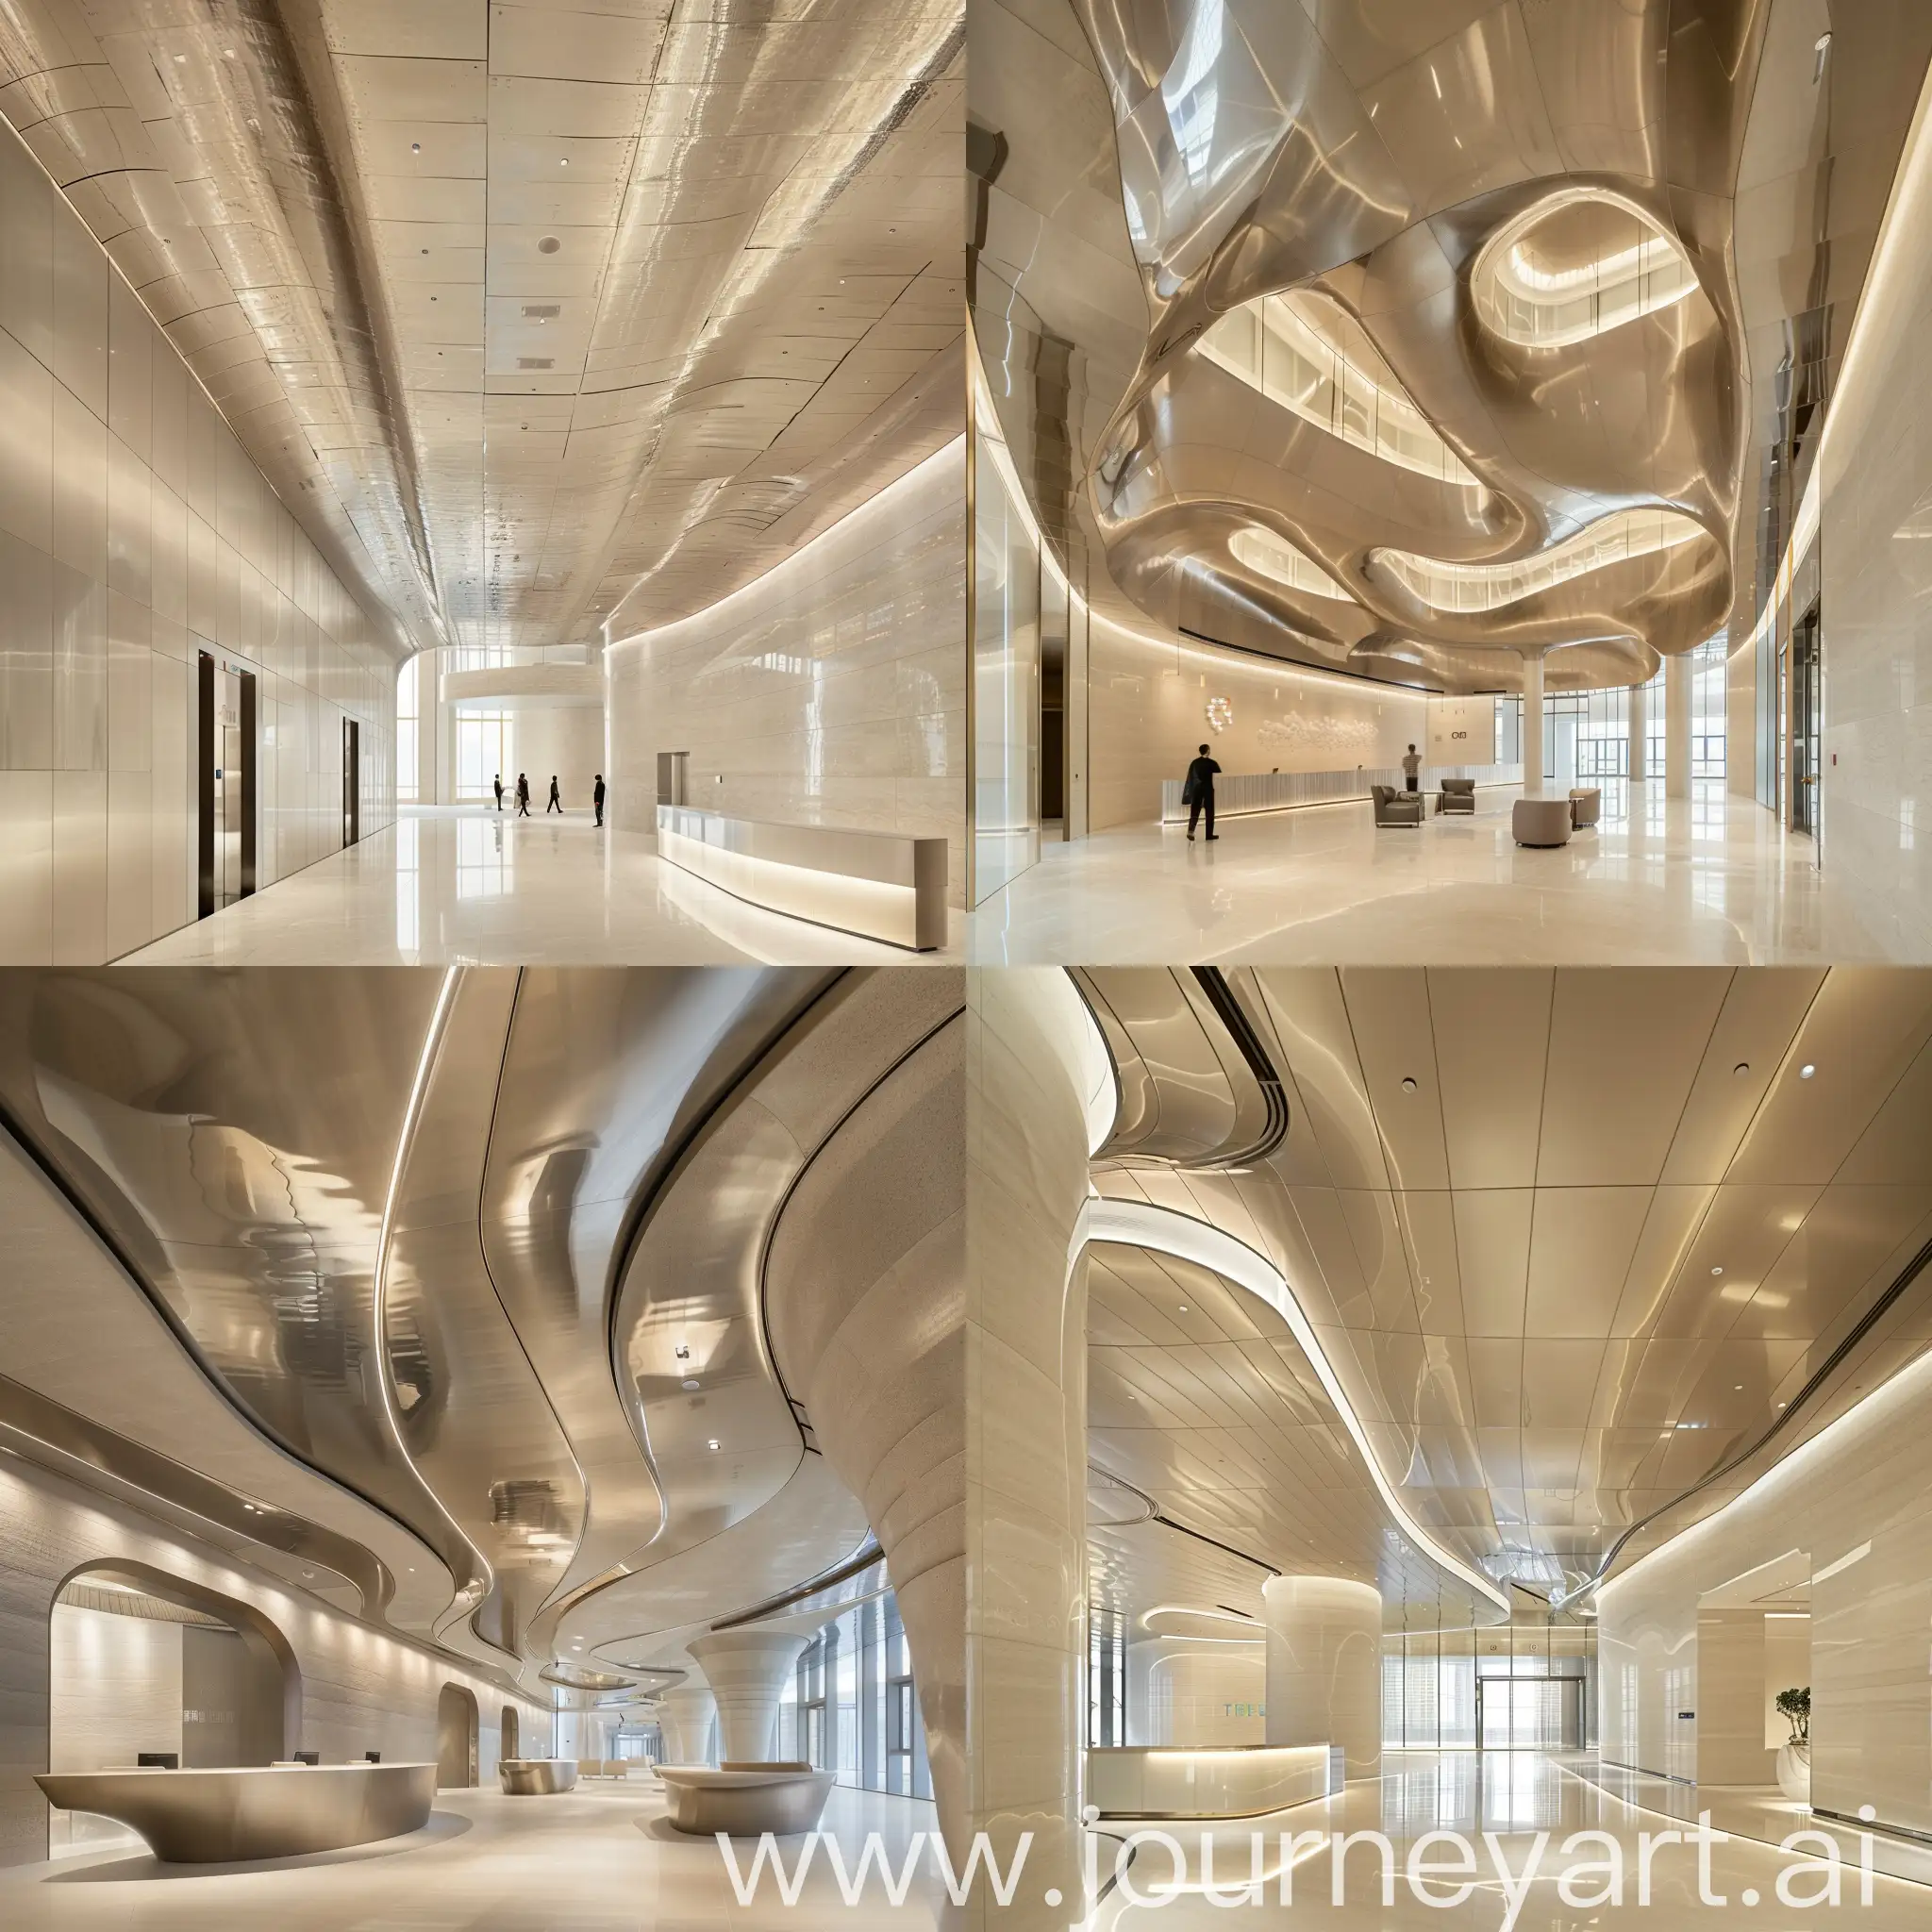 Futuristic-PostModern-Design-of-Tencent-Headquarters-Lobby-with-Oxidized-Aluminum-and-Light-Beige-Limestone